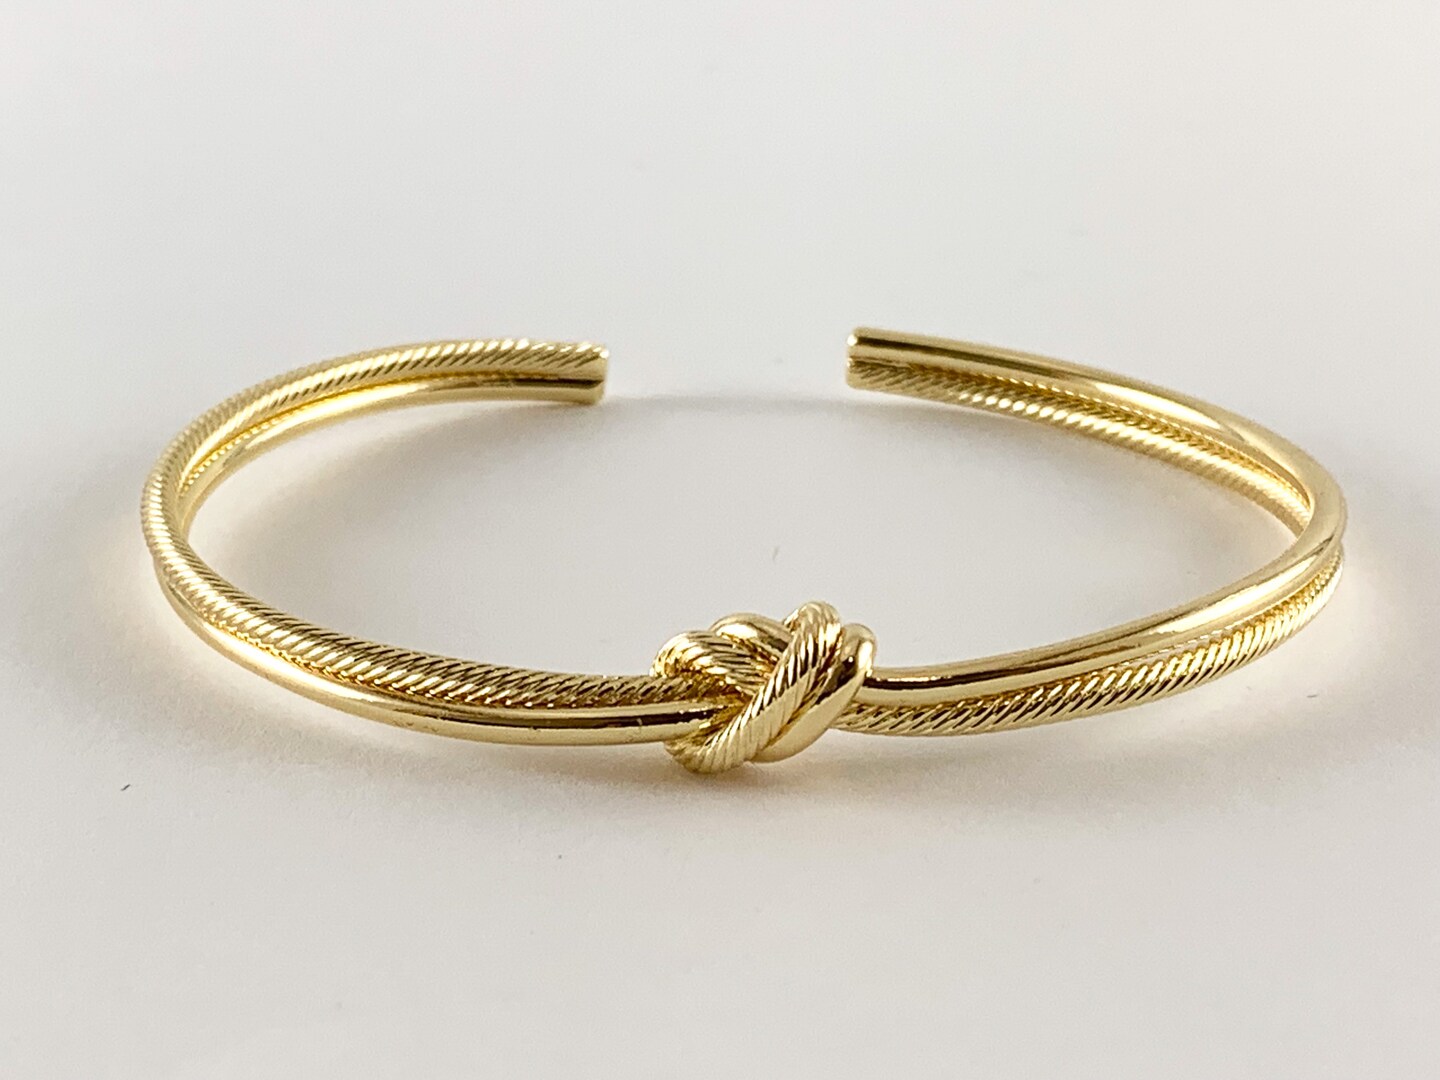 Real Gold 18K Plated Copper 2 Layers Knotted Adjustable Bracelet Cuffs 1 pc